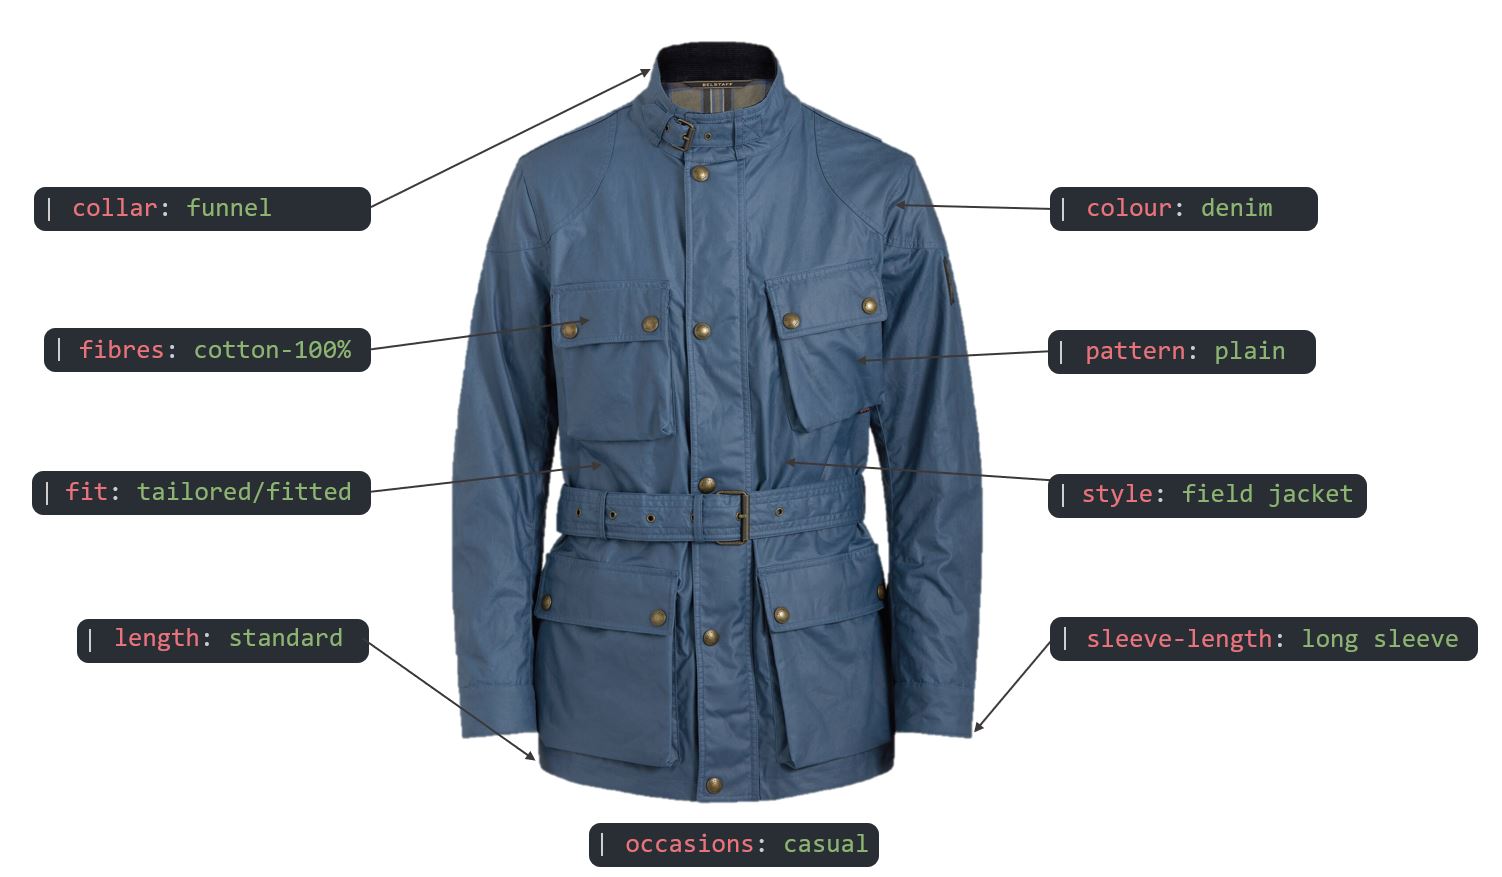 Example of a set of Dressipi's garment attributes for a jacket